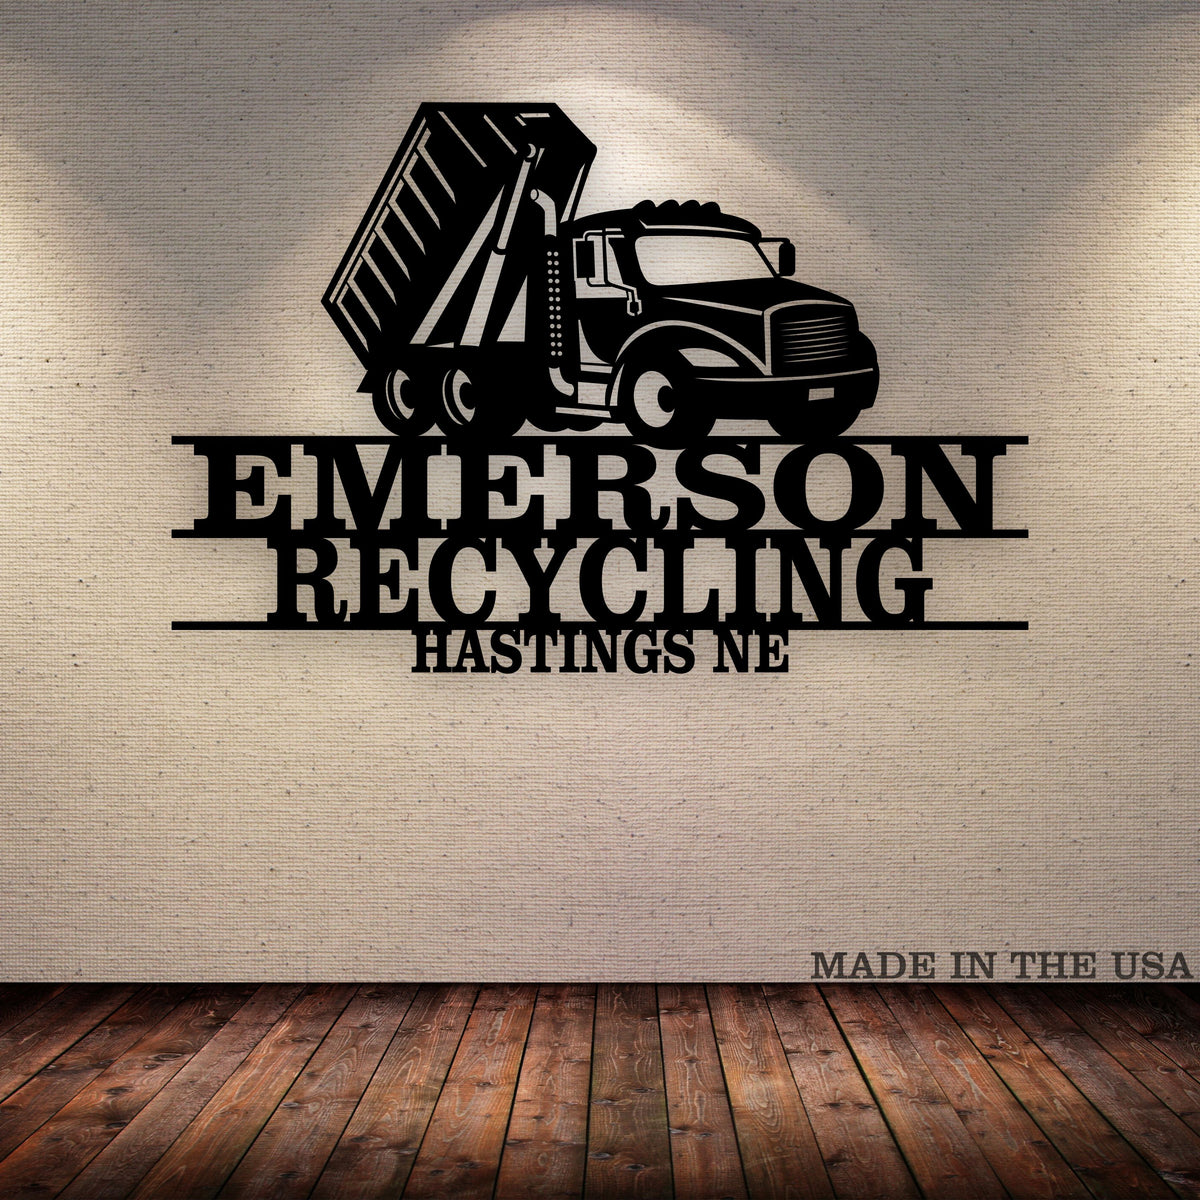 Roll Off Truck Your Text Here Metal Wall Art Free Shipping